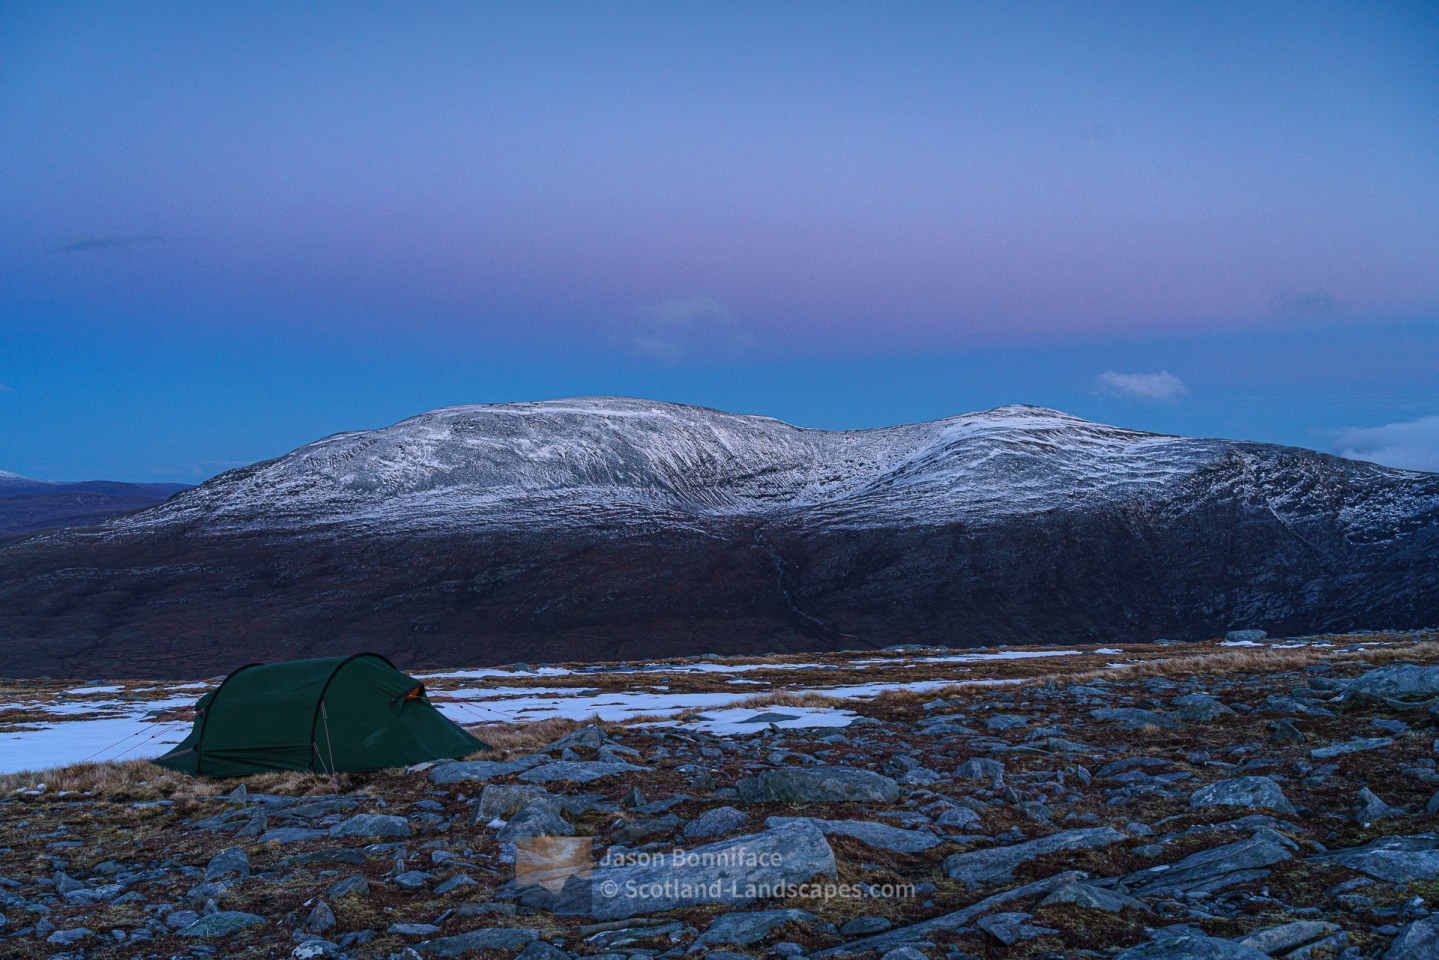 Late evening on a cold camp with Ben Hee behind, Northern Sutherland